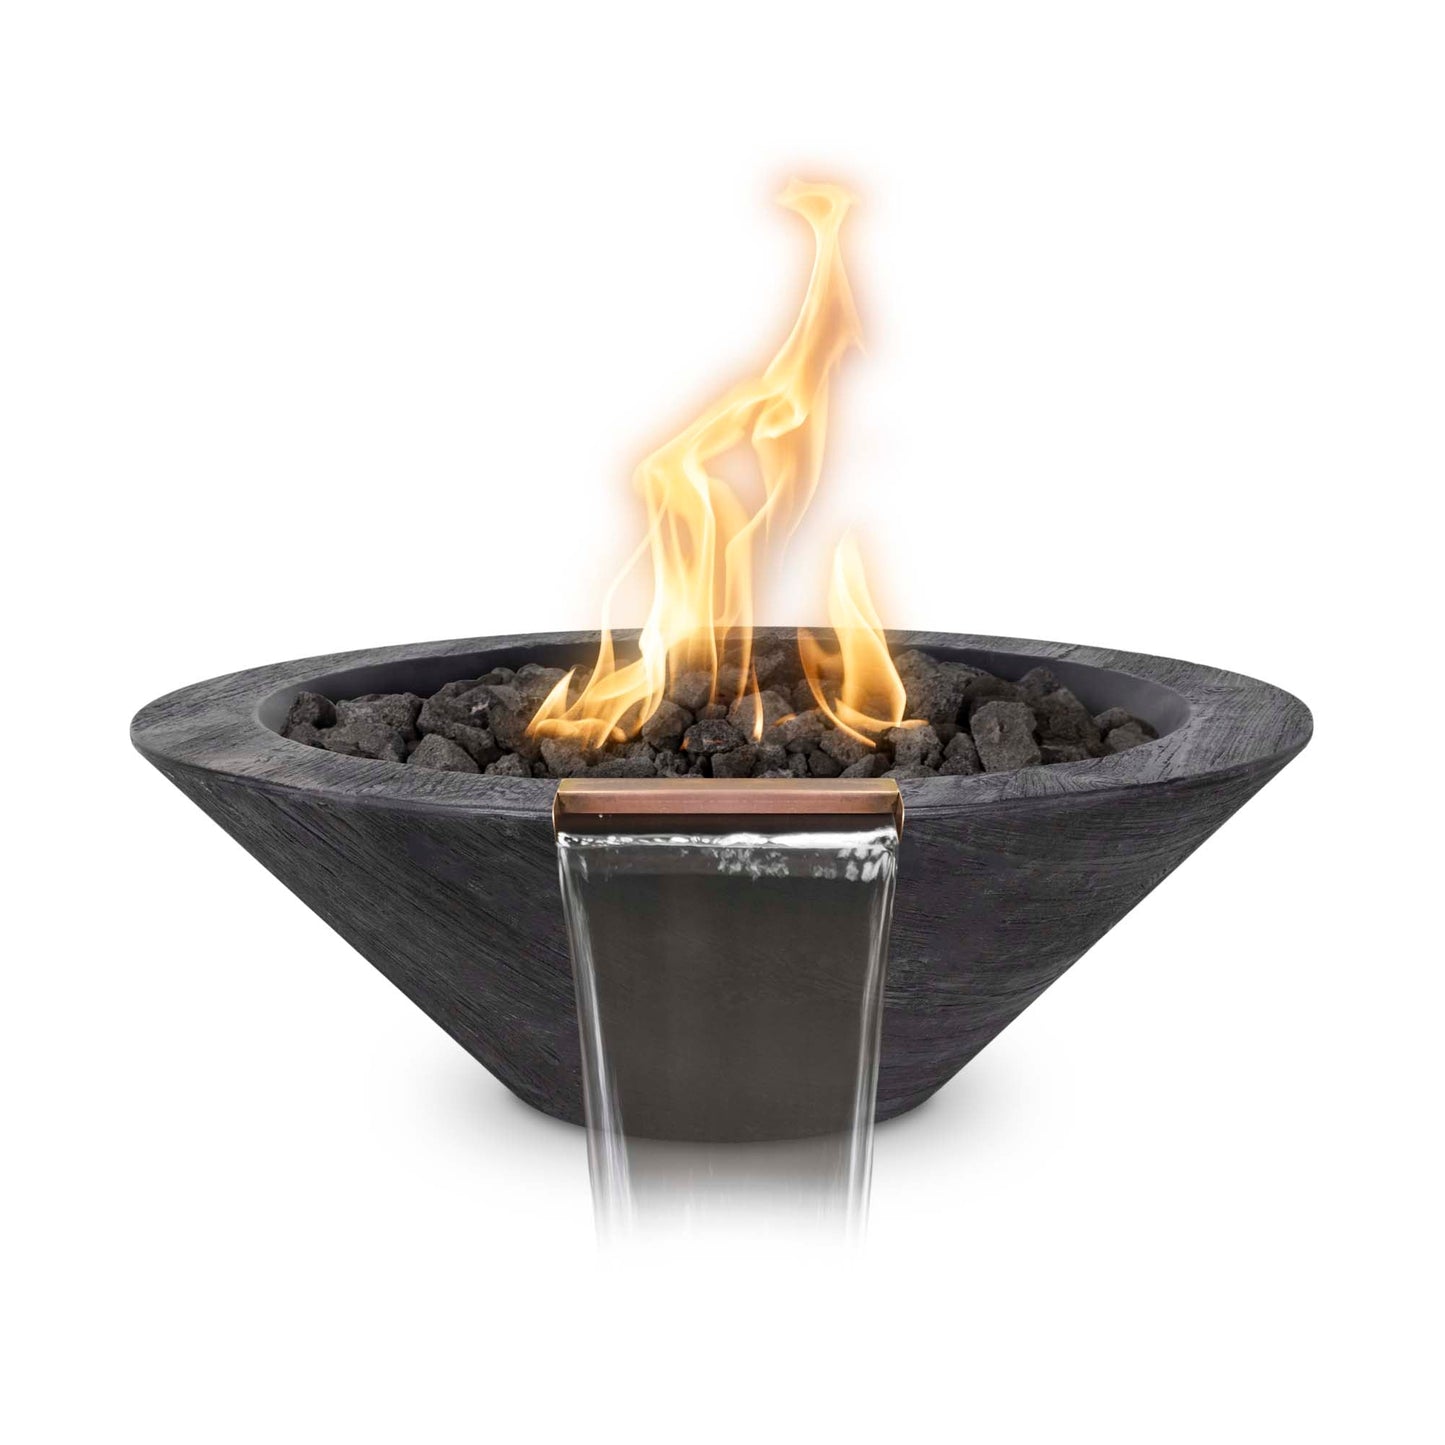 24" Cazo Wood Grain Fire and Water Bowl - 12V Electronic Ignition-Novel Home